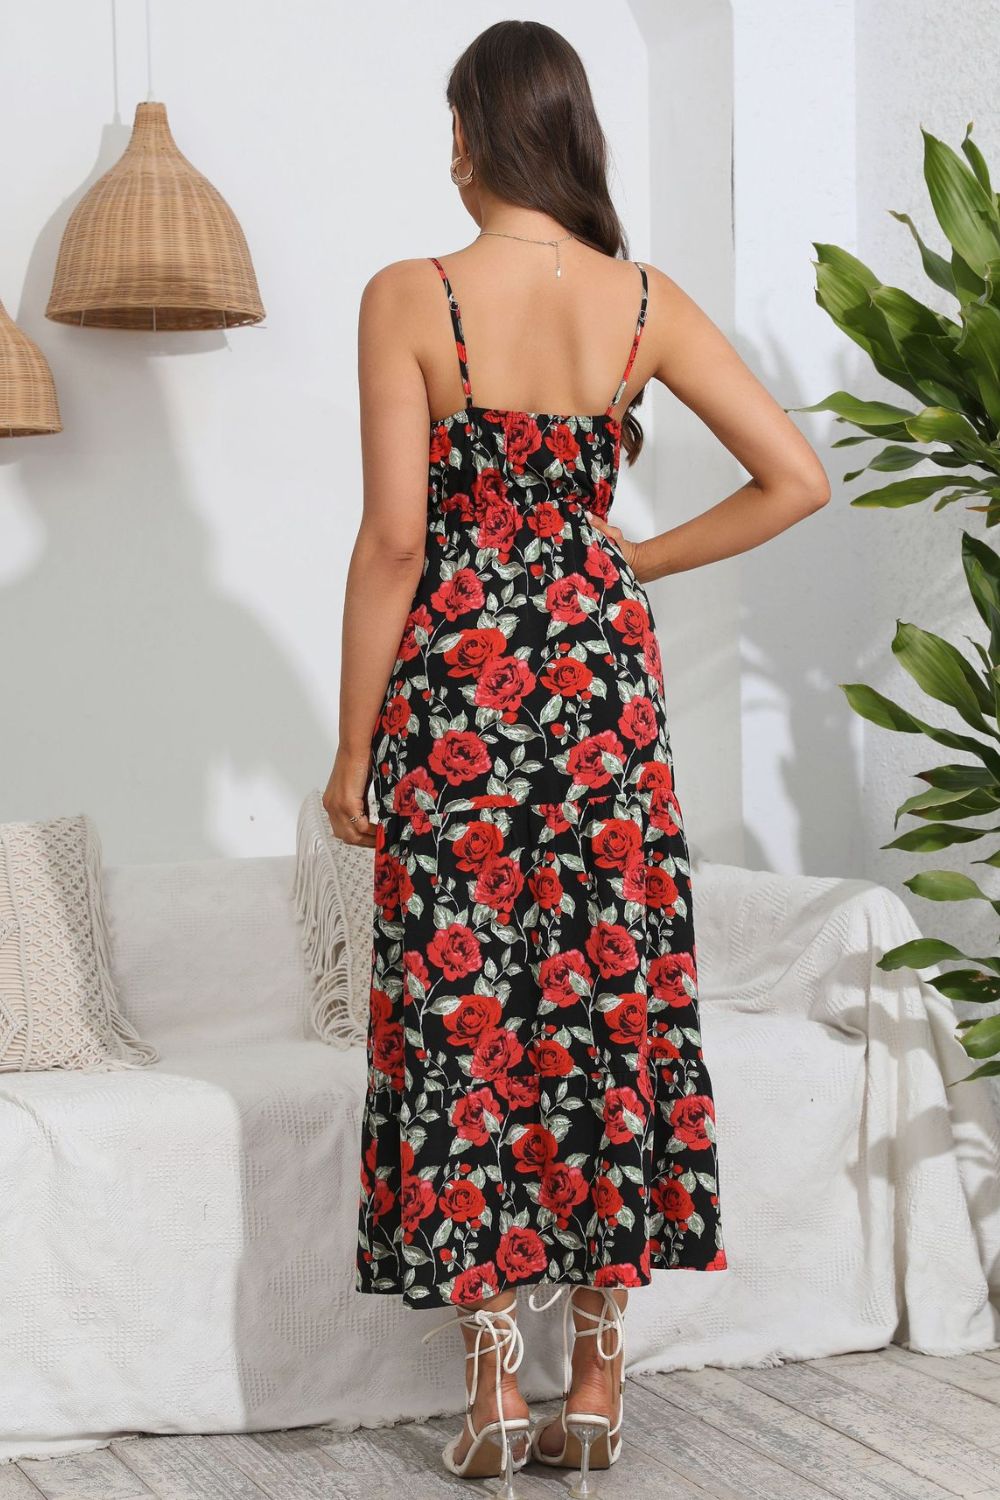 Rose Print Spaghetti Strap Sweetheart Neck Dress - Cheeky Chic Boutique